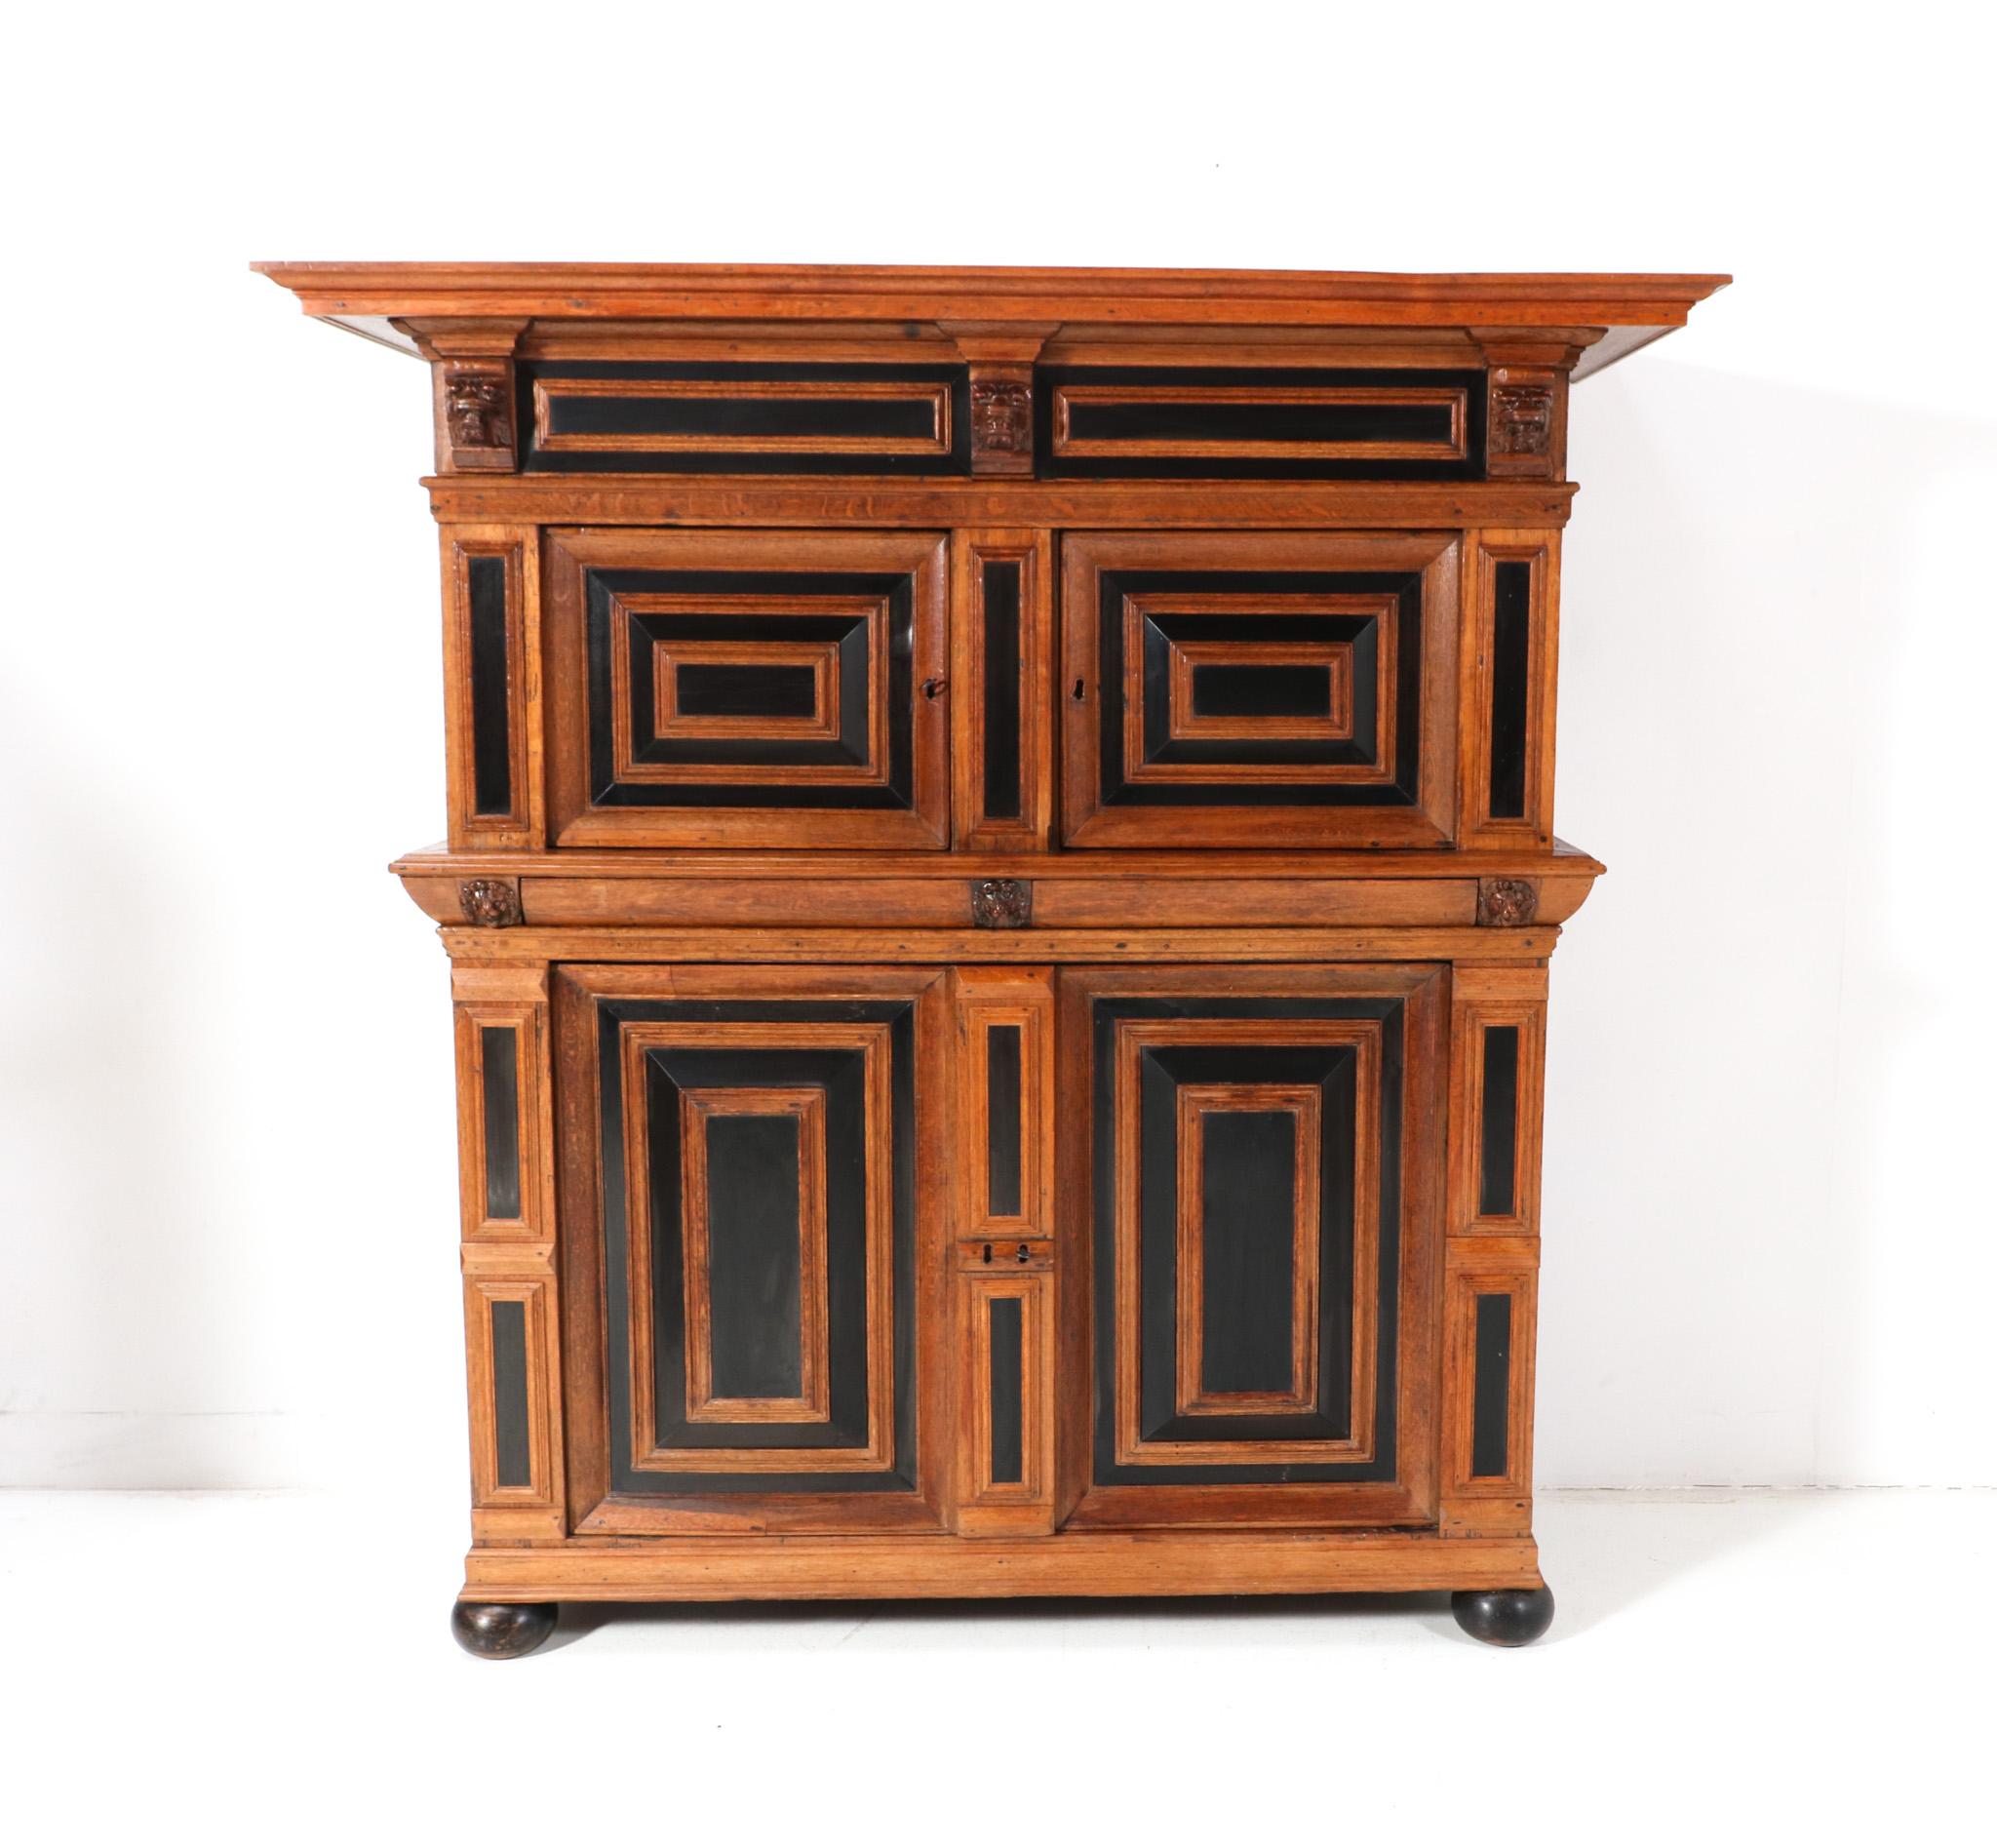 Stunning Renaissance cupboard or so-called Zeeuwse Kast in the Netherlands.
Striking Dutch design from the Late 17th century.
Solid original oak two-piece cupboard with original ebony elements.
The hand carved lion heads are also original.
This